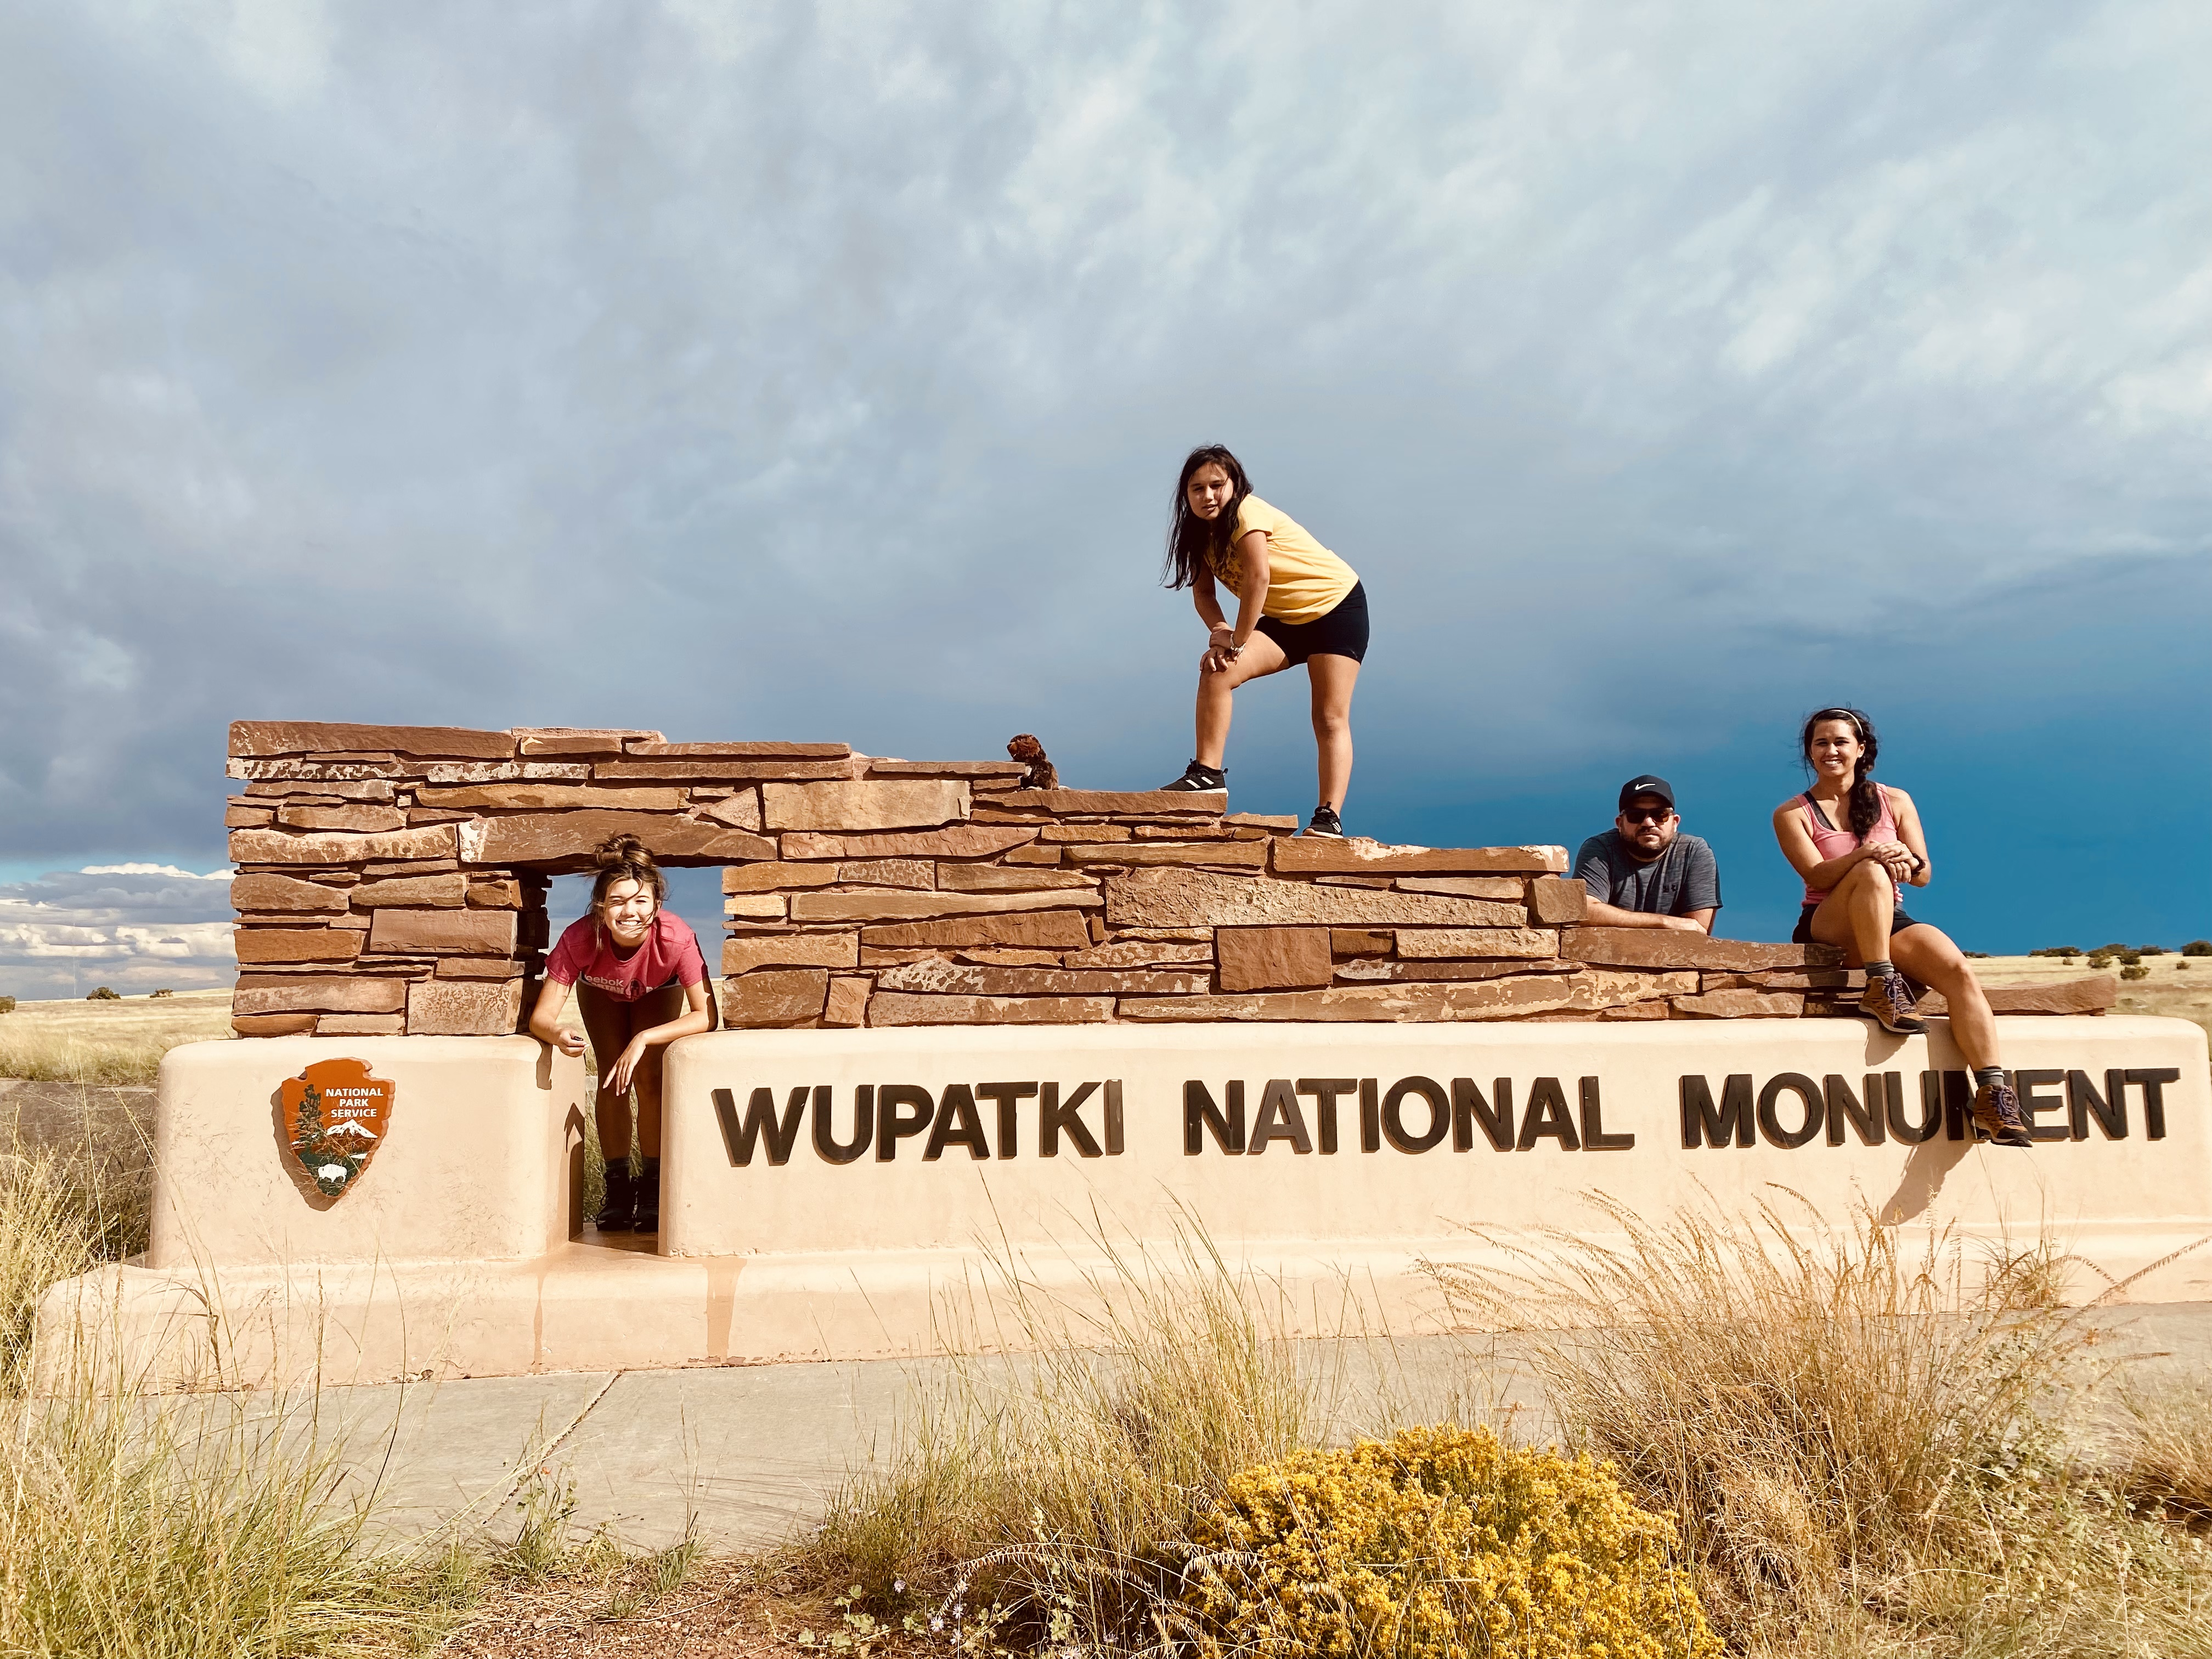 Family pic with wupatki national monument sign